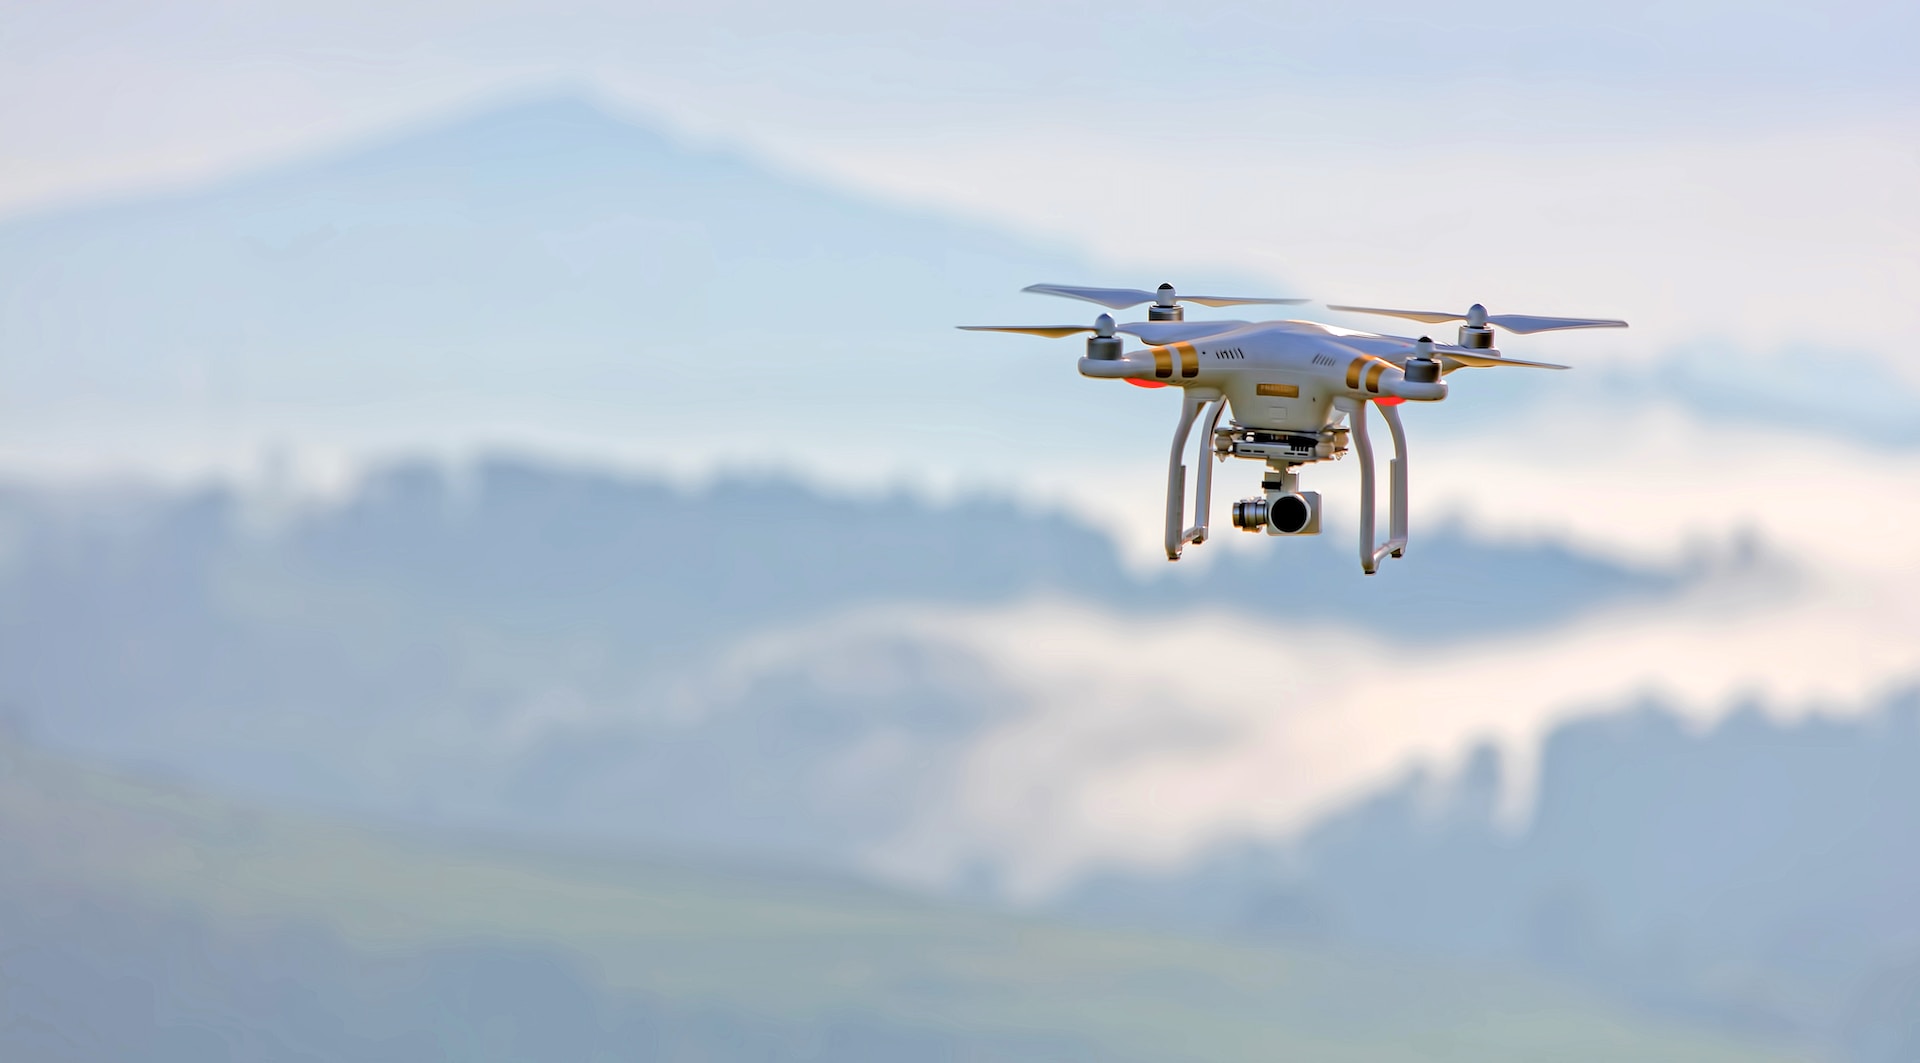 Explore the skies with insight! Learn about the pivotal roles of Drone Service Providers as they revolutionize industries through five essential functions.